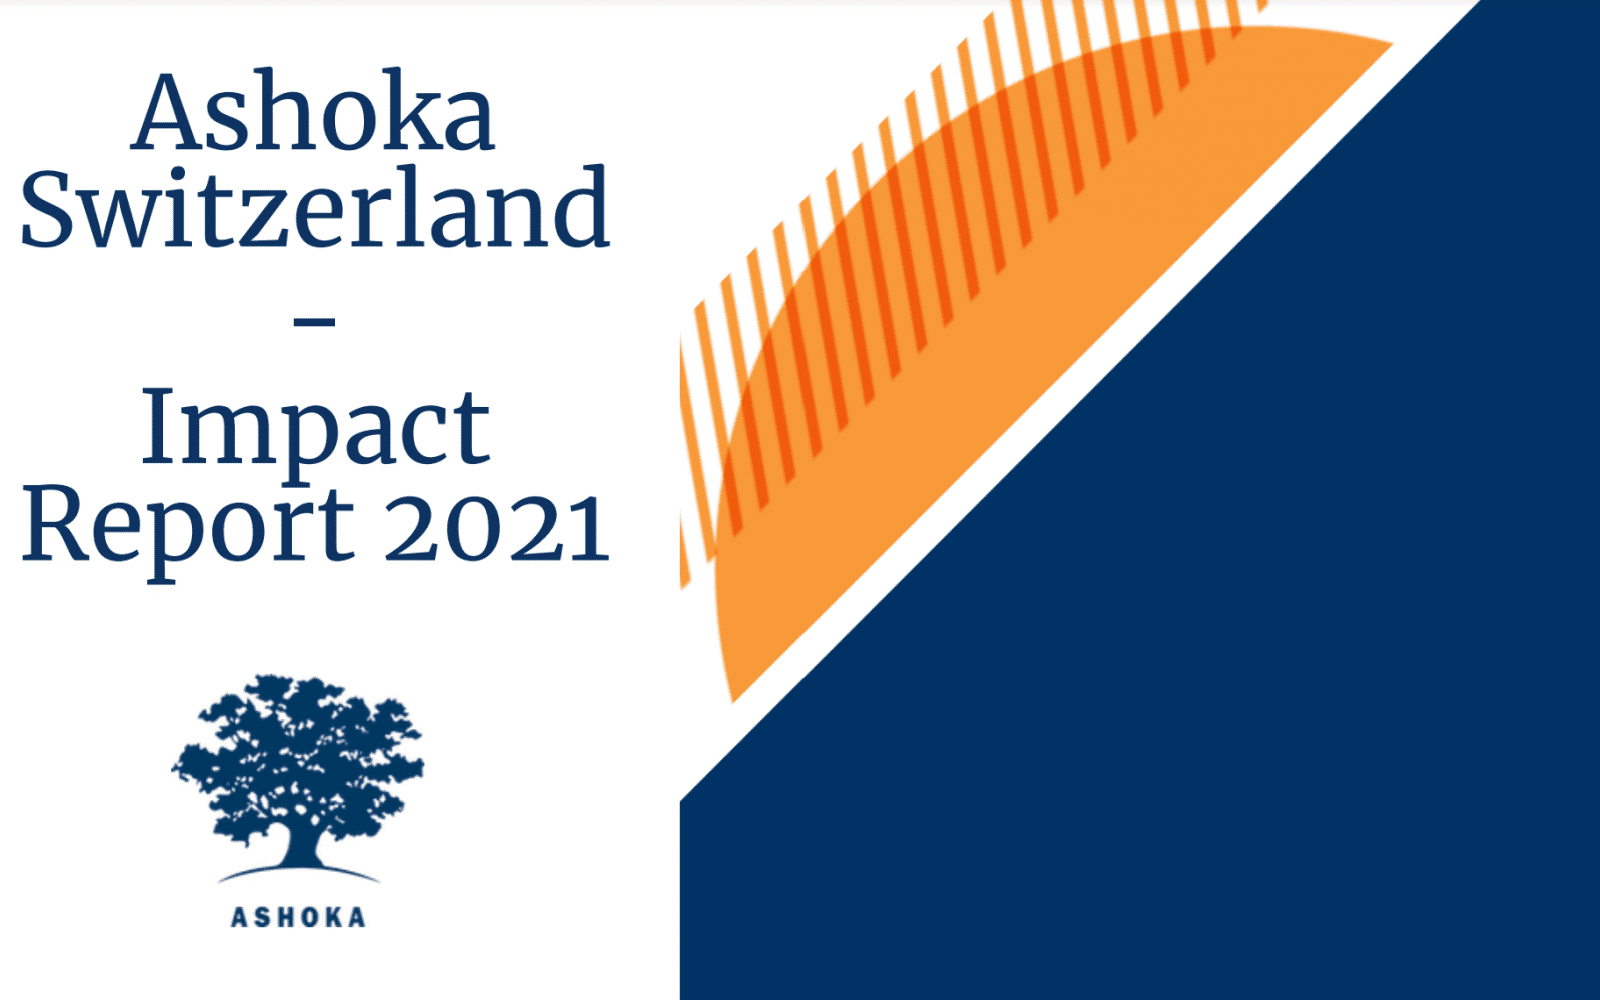 ashoka switzerland impact report 2021 cover page. left hand side is a white background with the title and blue tree ashoka logo. right side is a navy and orange graphic of a rising sun.